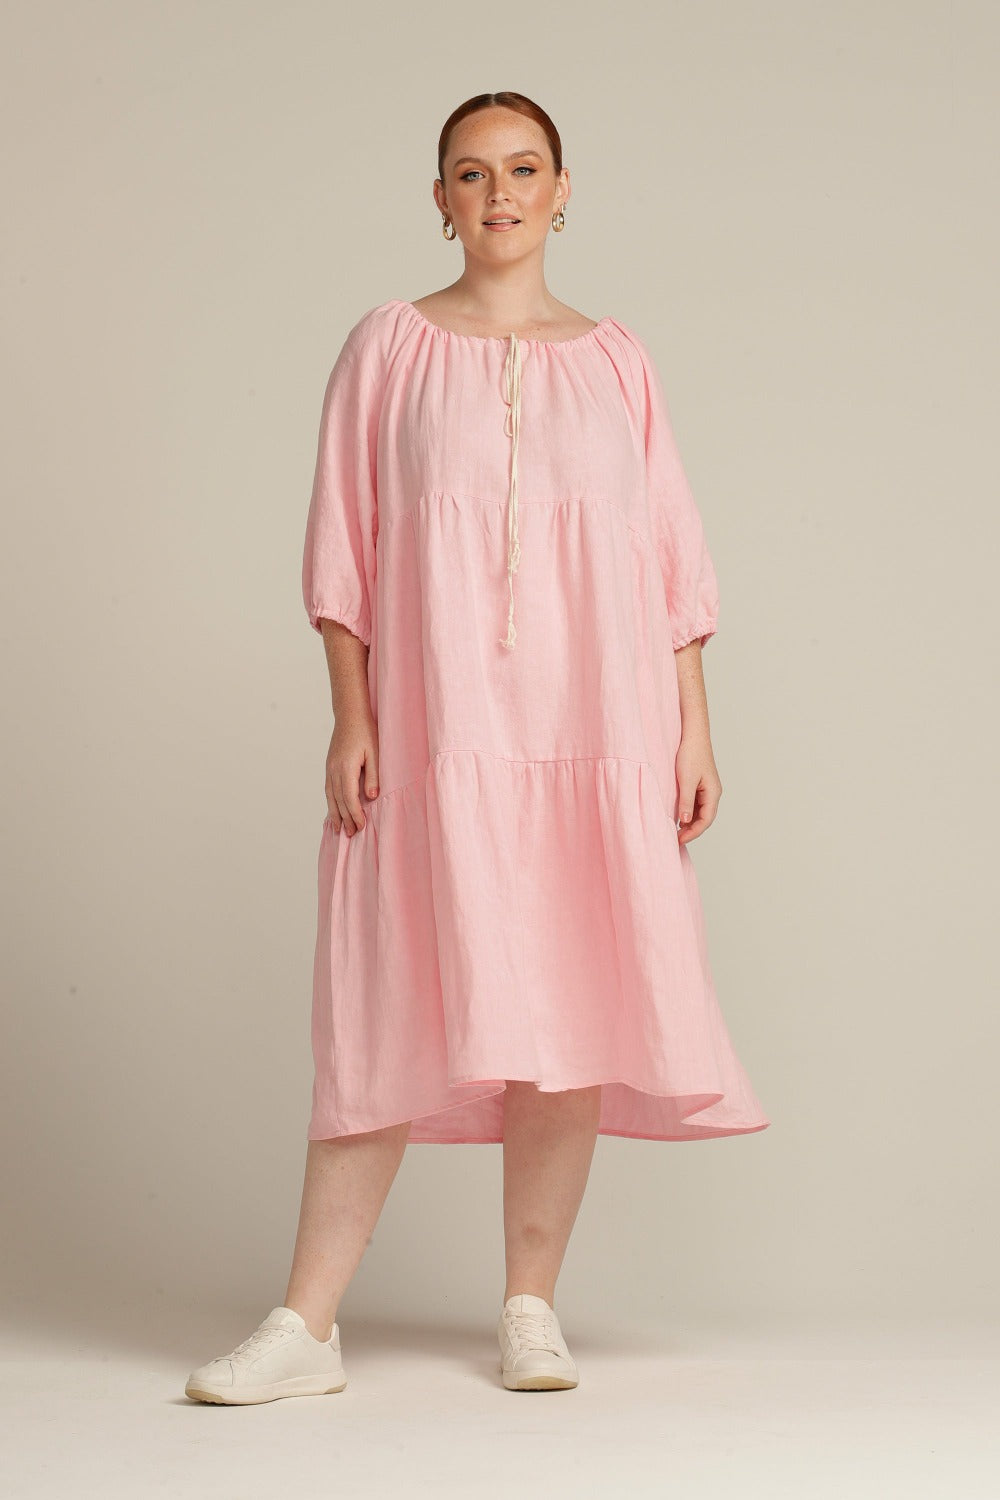 white woman facing the camera wearing a pink linen dress and white shoes